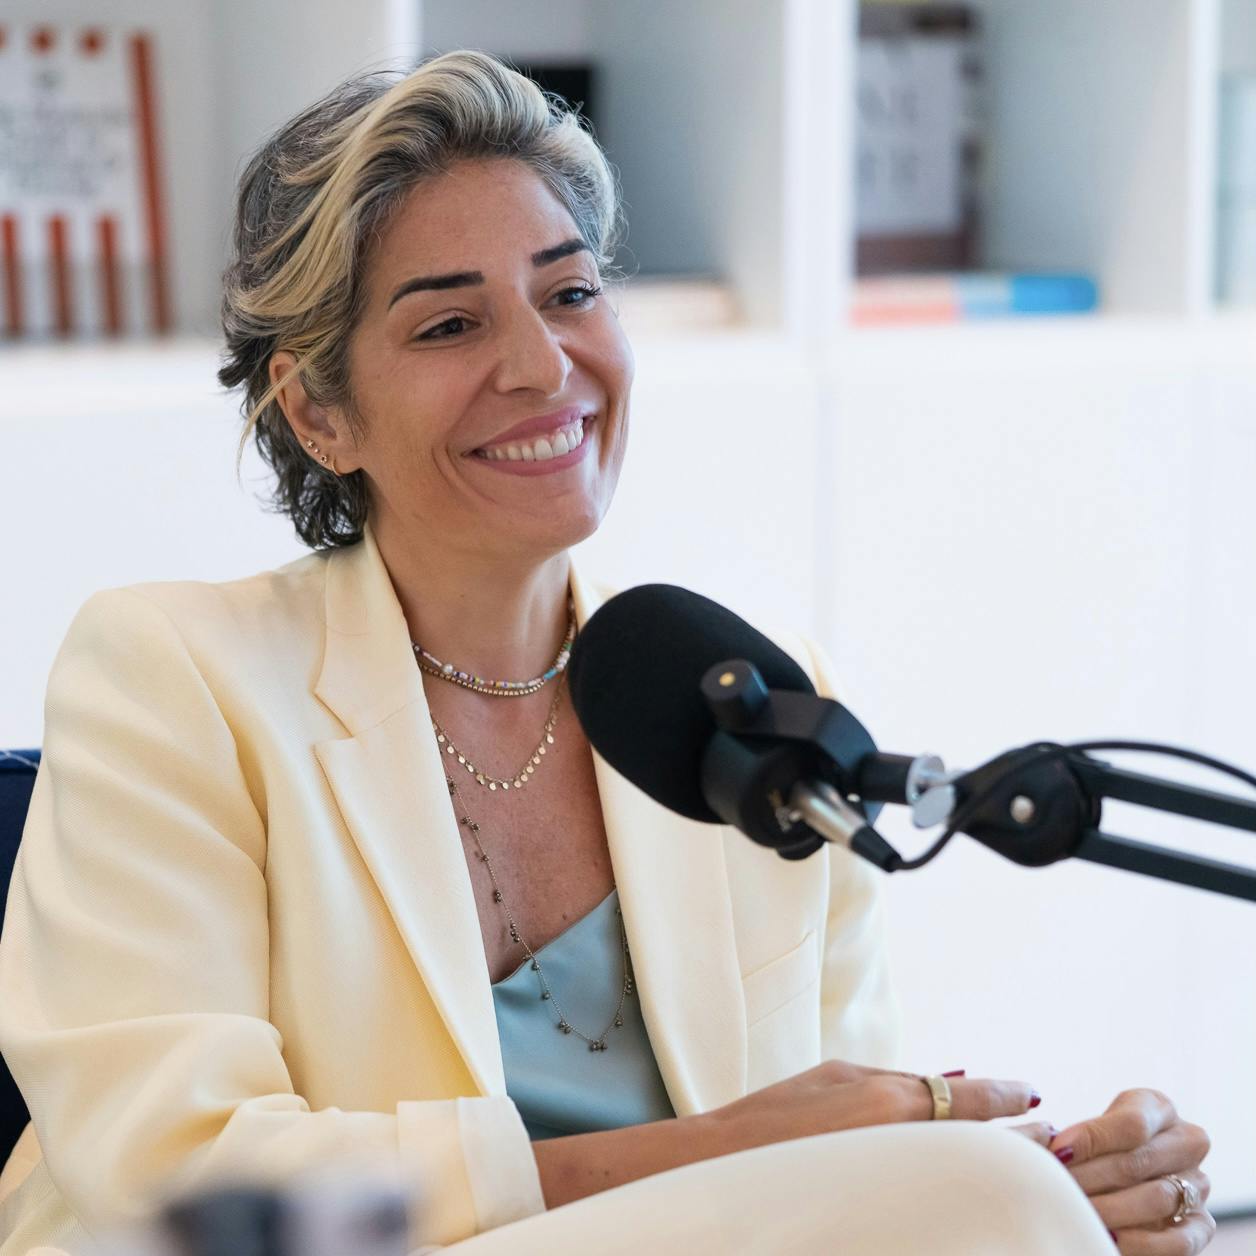 “If you want to employ more women, design your workplace around it.” Rania Masri El Khatib’s call to arms for female employees is loud and clear.